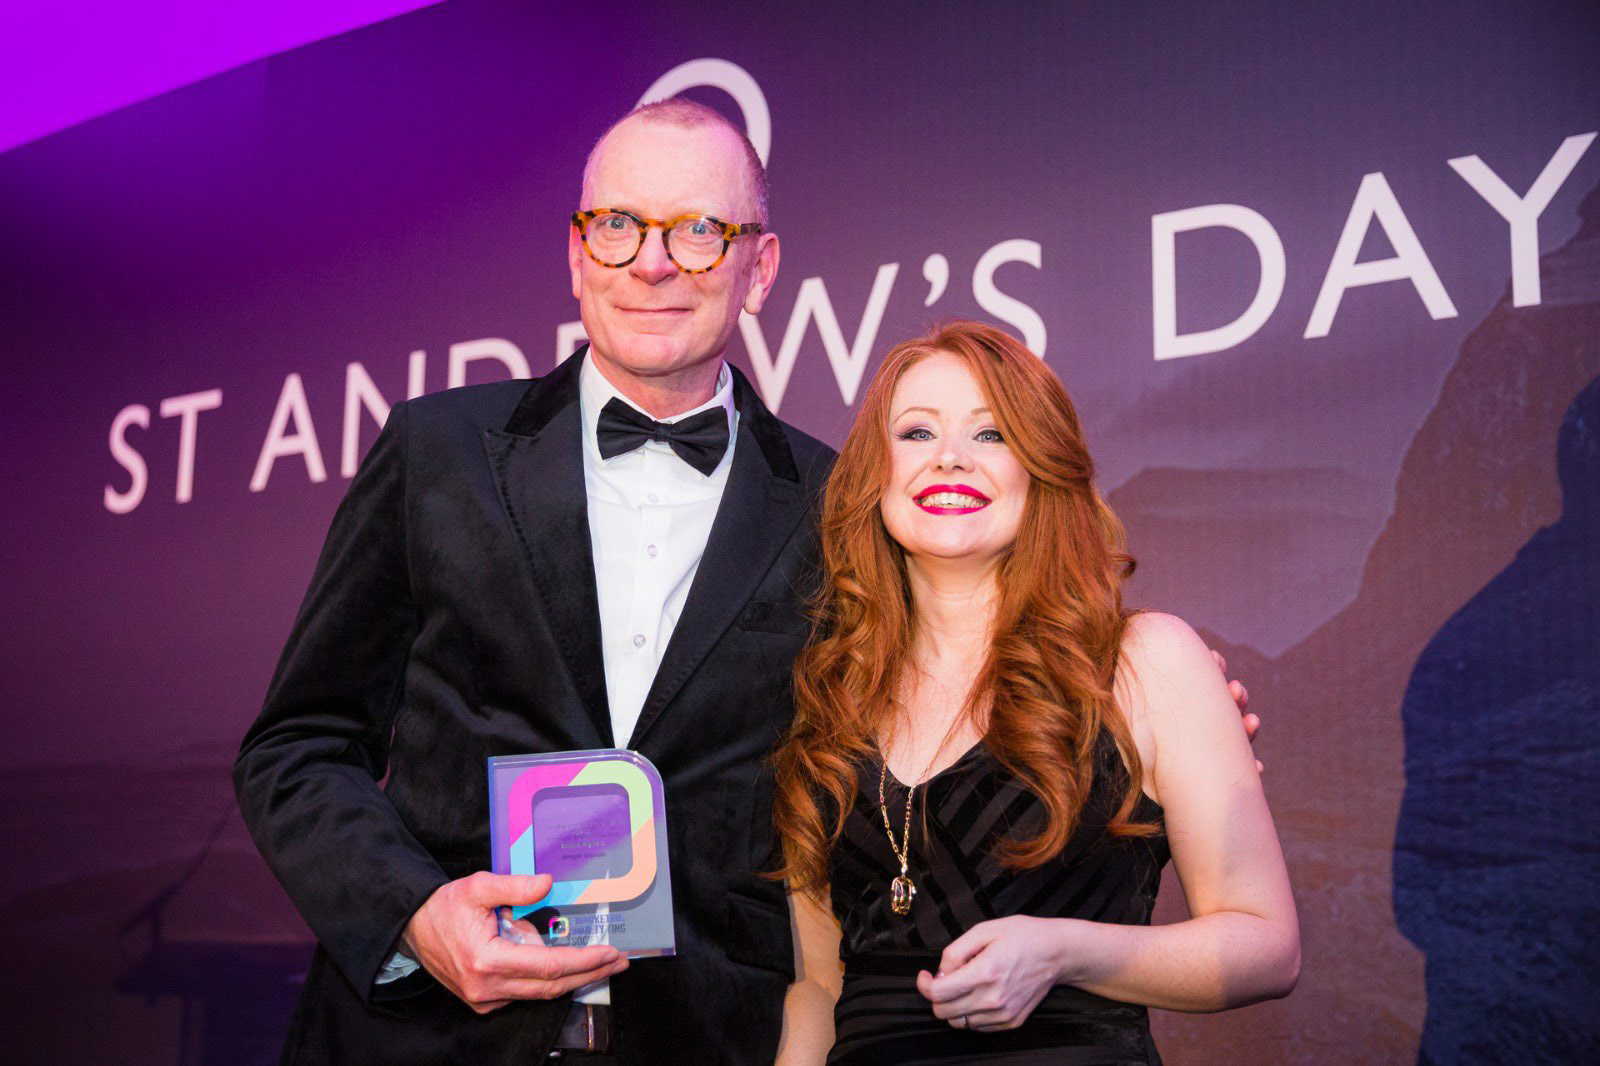 Agency Employer Brand of the Year